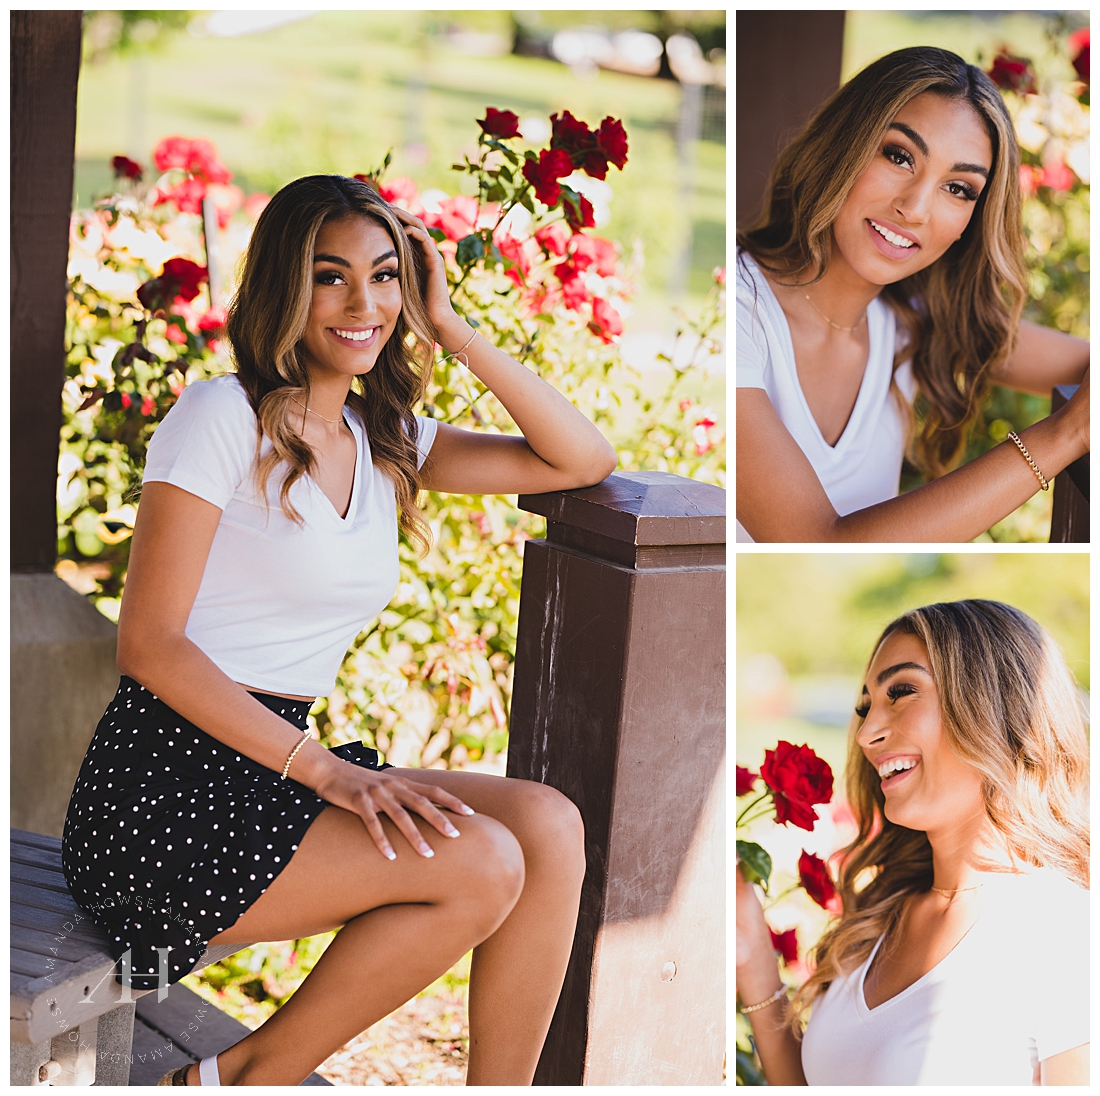 Blooming Flowers for Senior Portraits in a Garden | Cute Poses for Senior Girls | Photographed by the Best Tacoma Senior Photographer Amanda Howse Photography